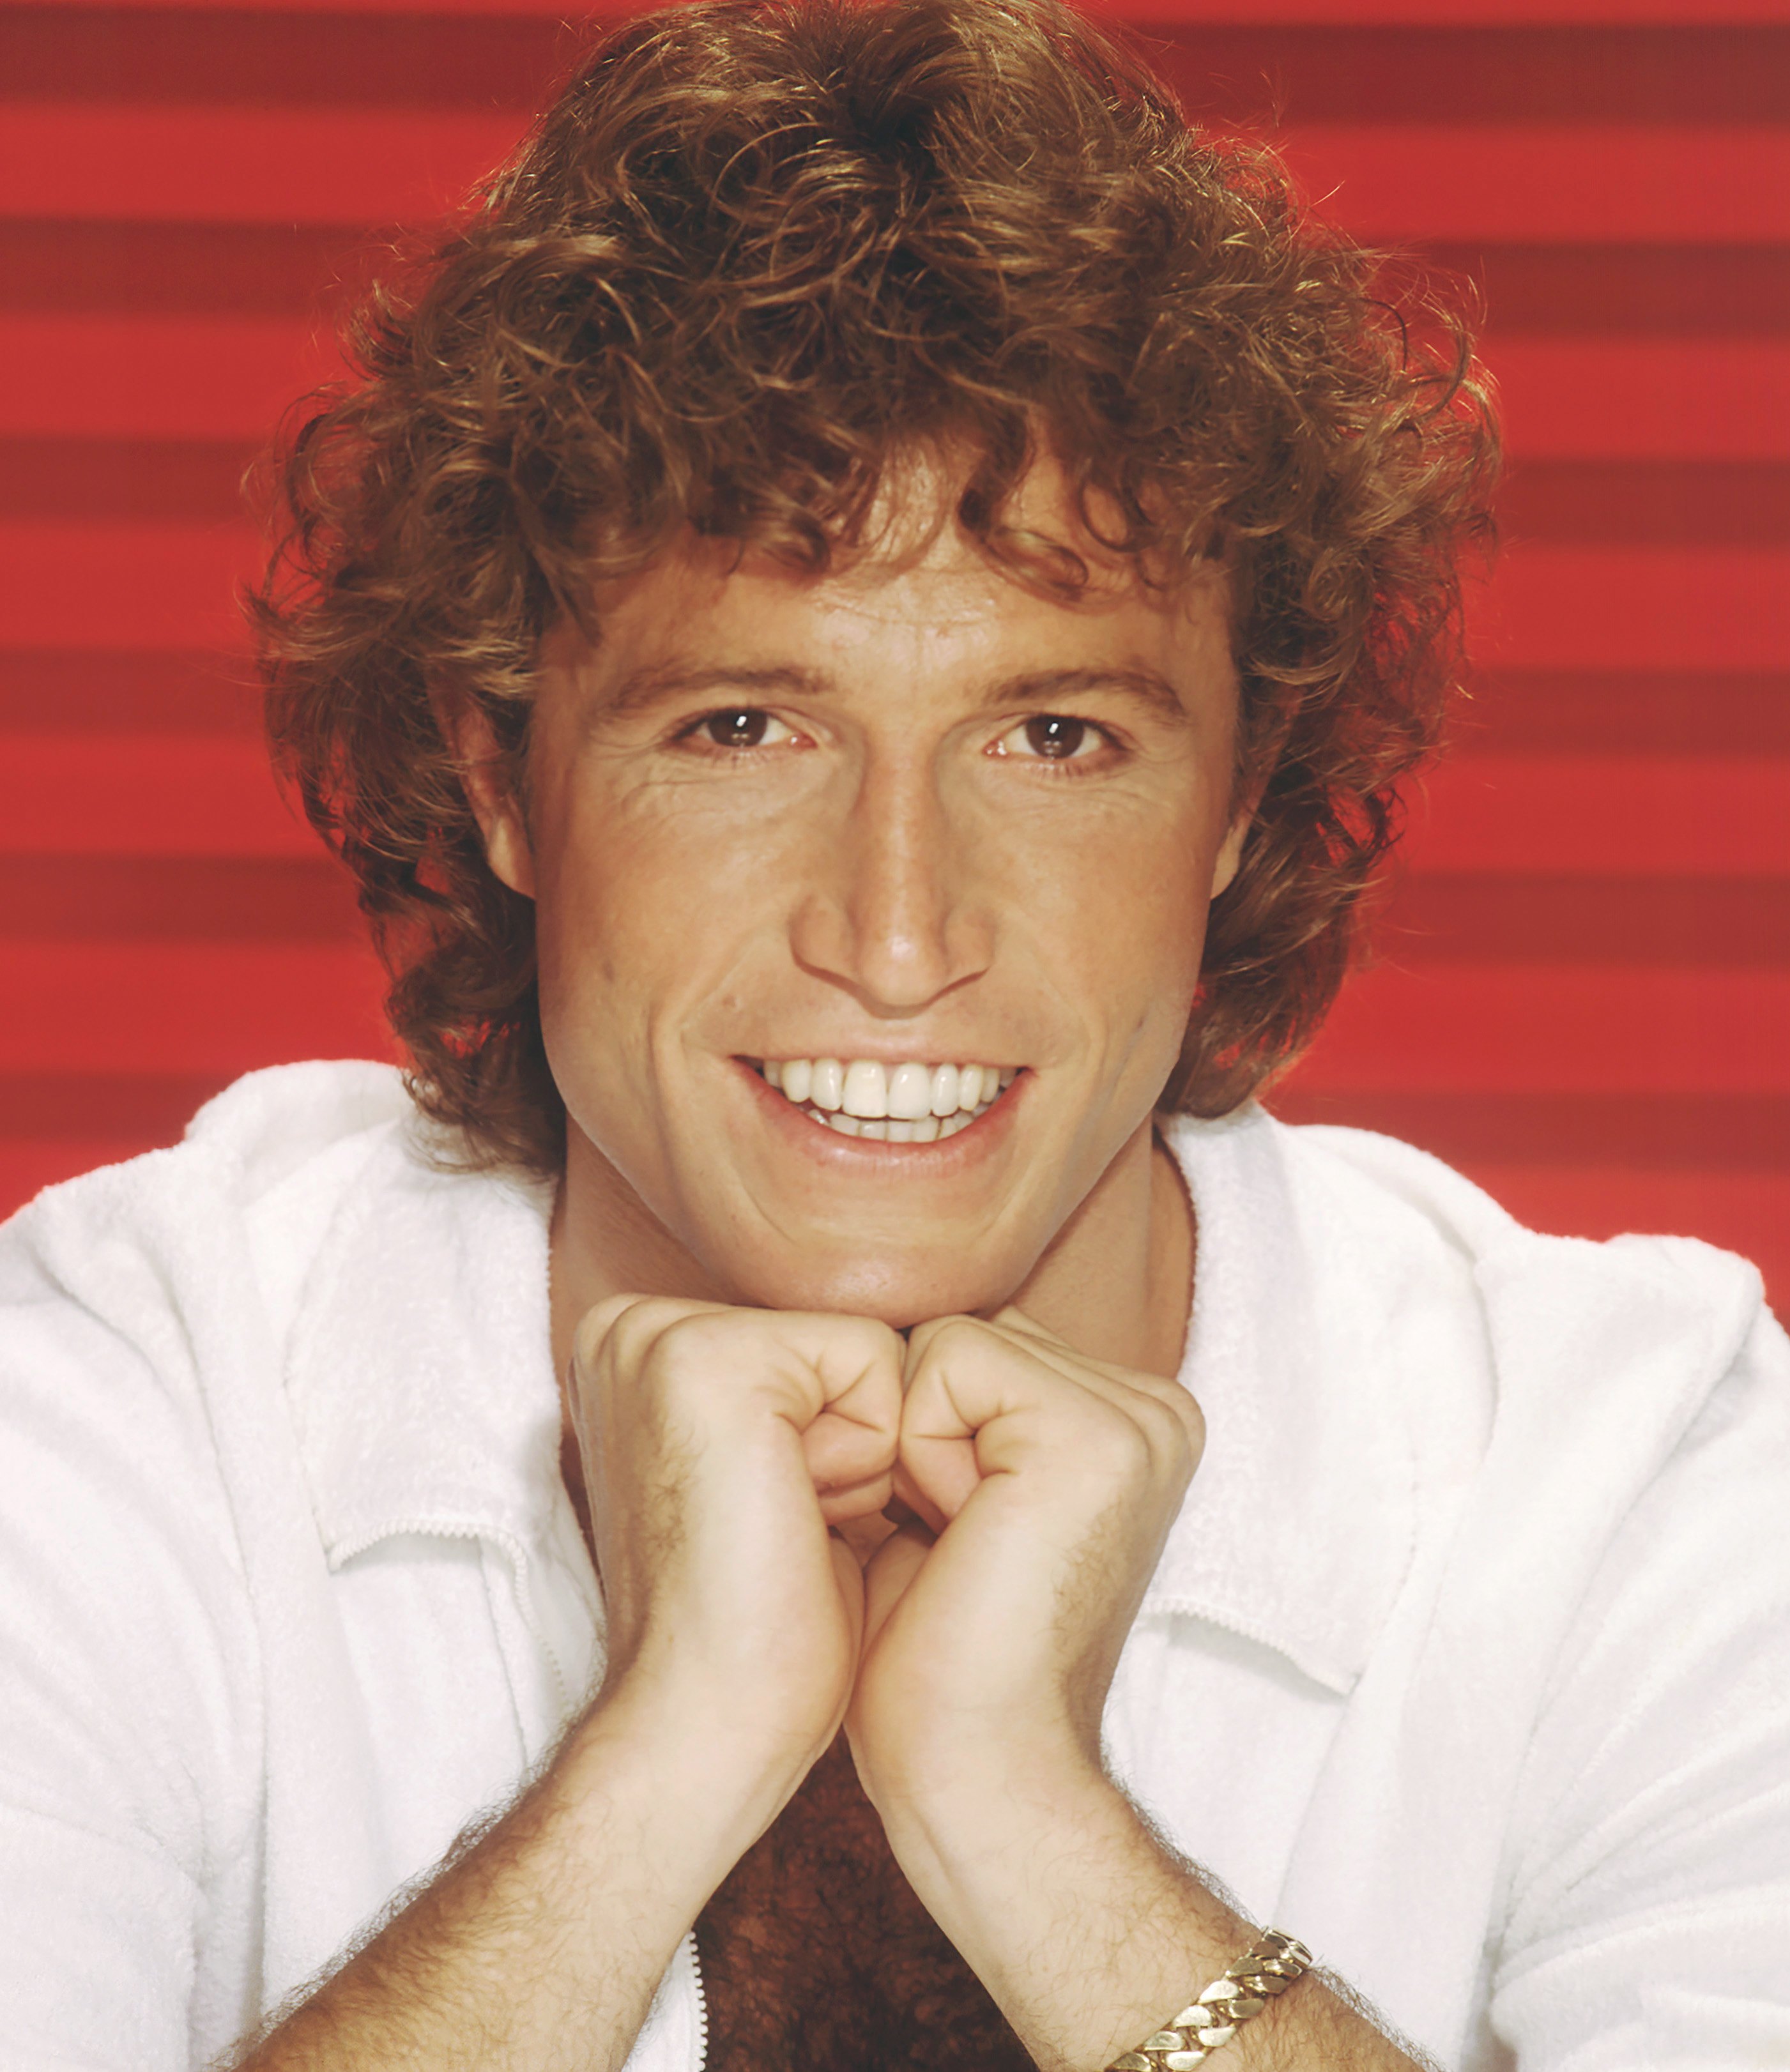 Singer Andy Gibb poses for a portrait in 1981 in Los Angeles, California | Source: Getty Images